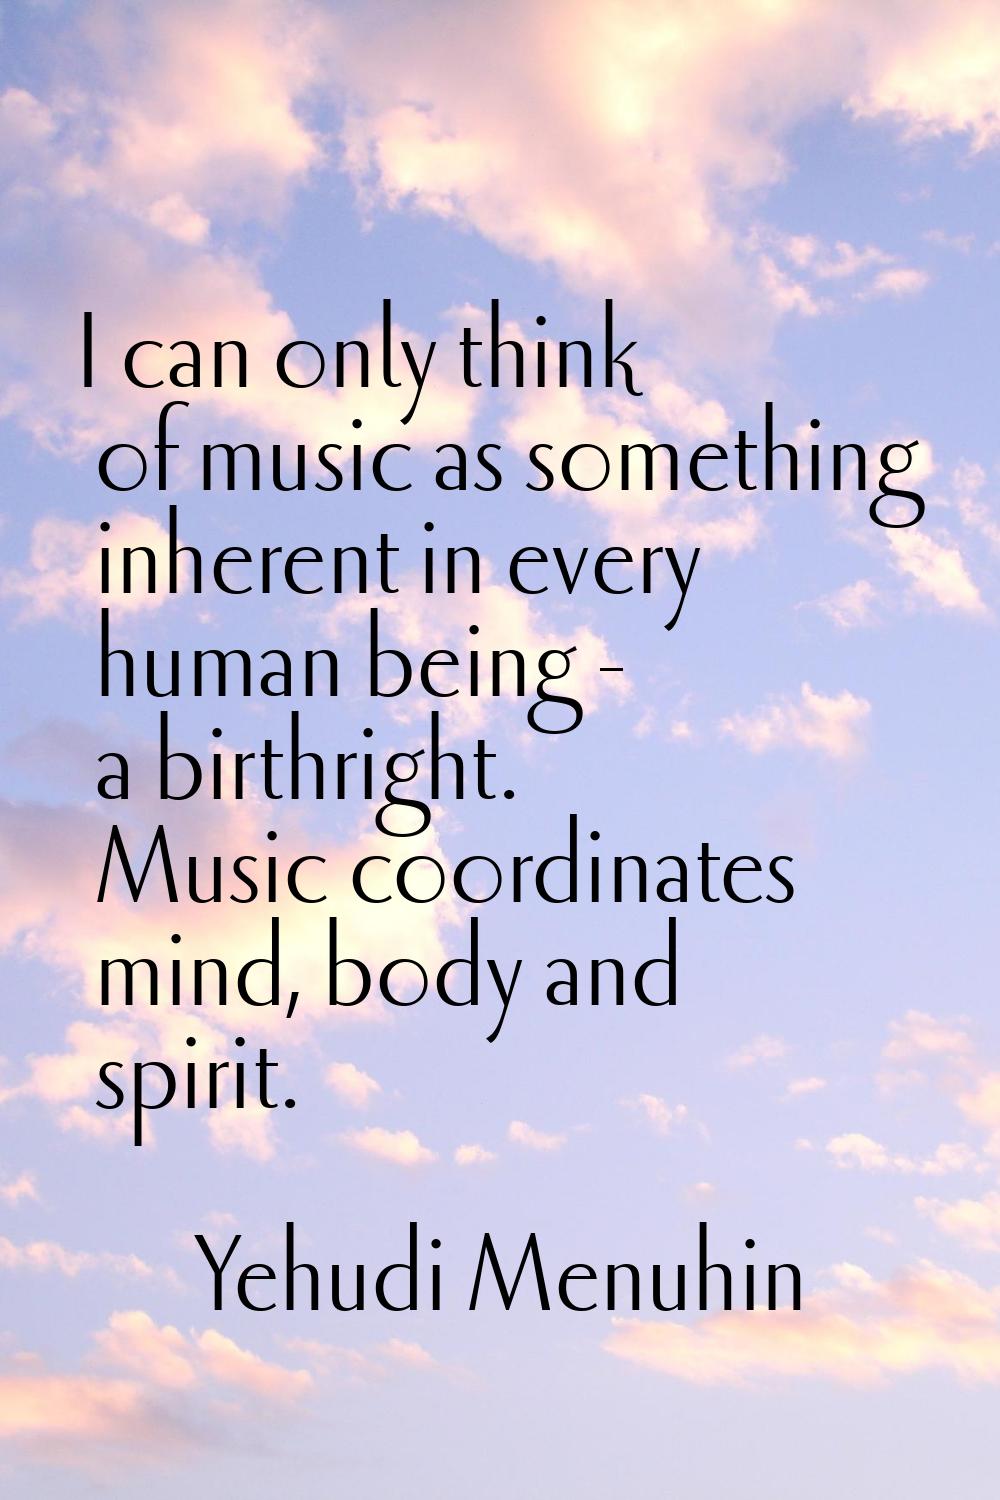 I can only think of music as something inherent in every human being - a birthright. Music coordina